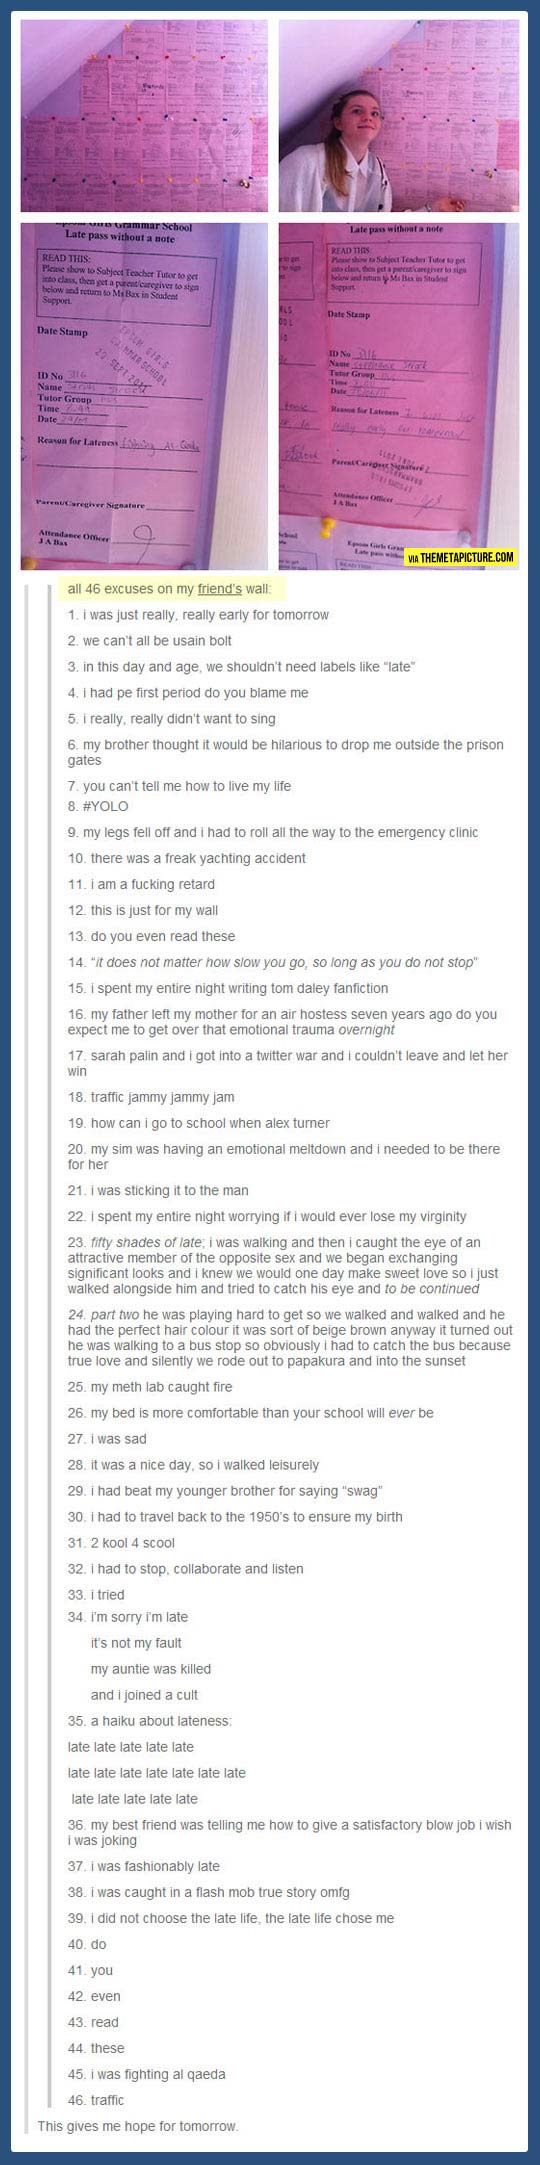 46 excuses for being late…